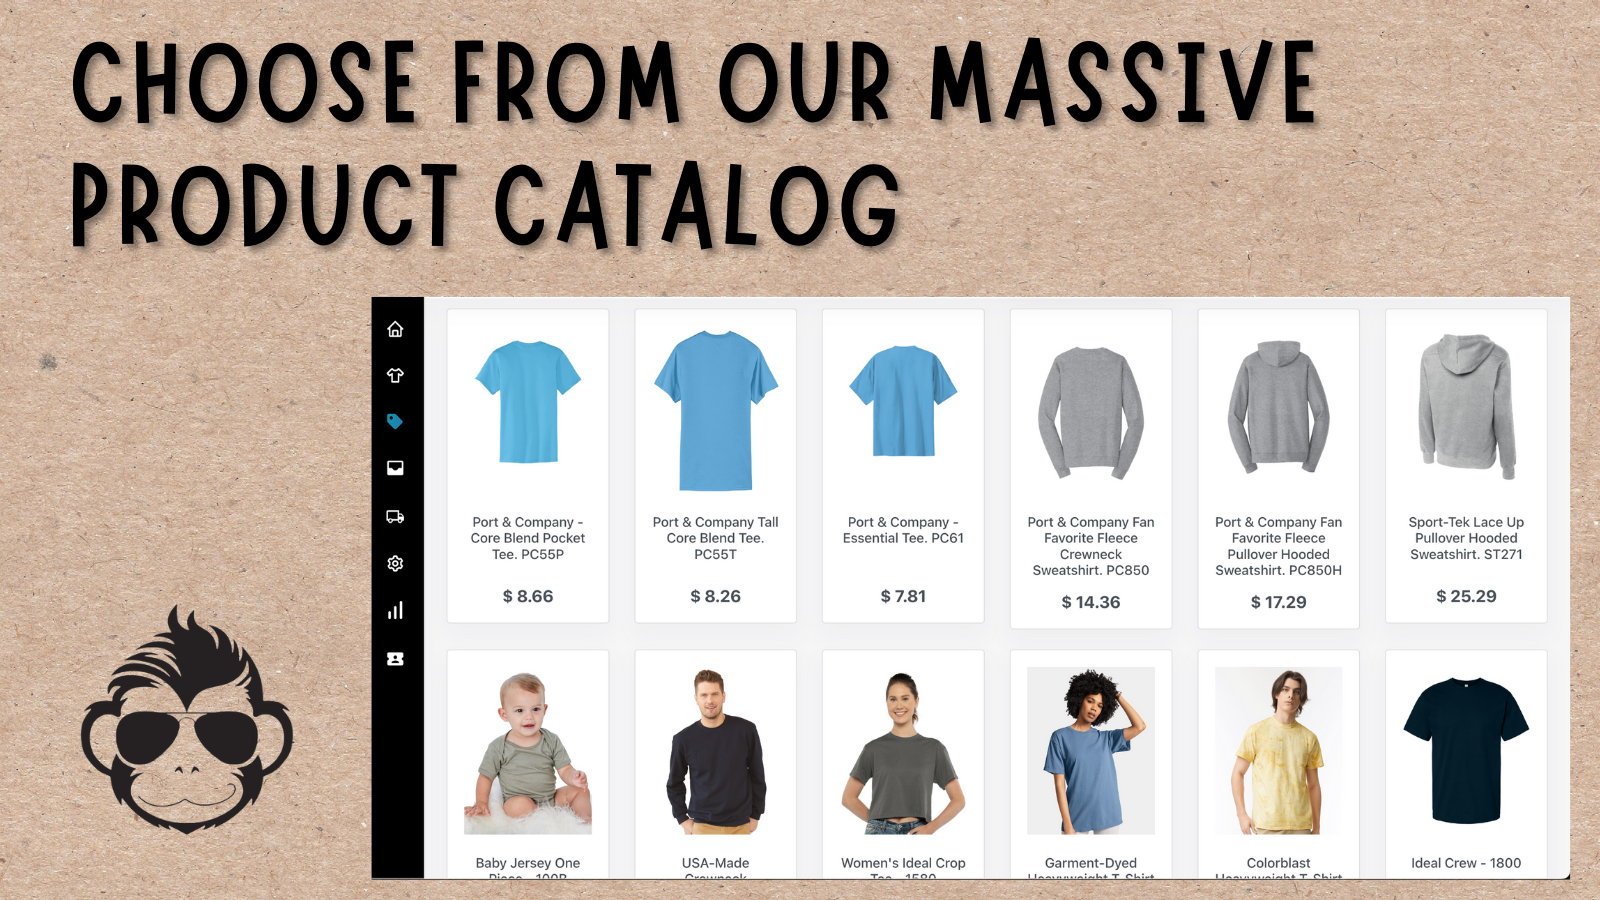 Choose from our massive product catalog